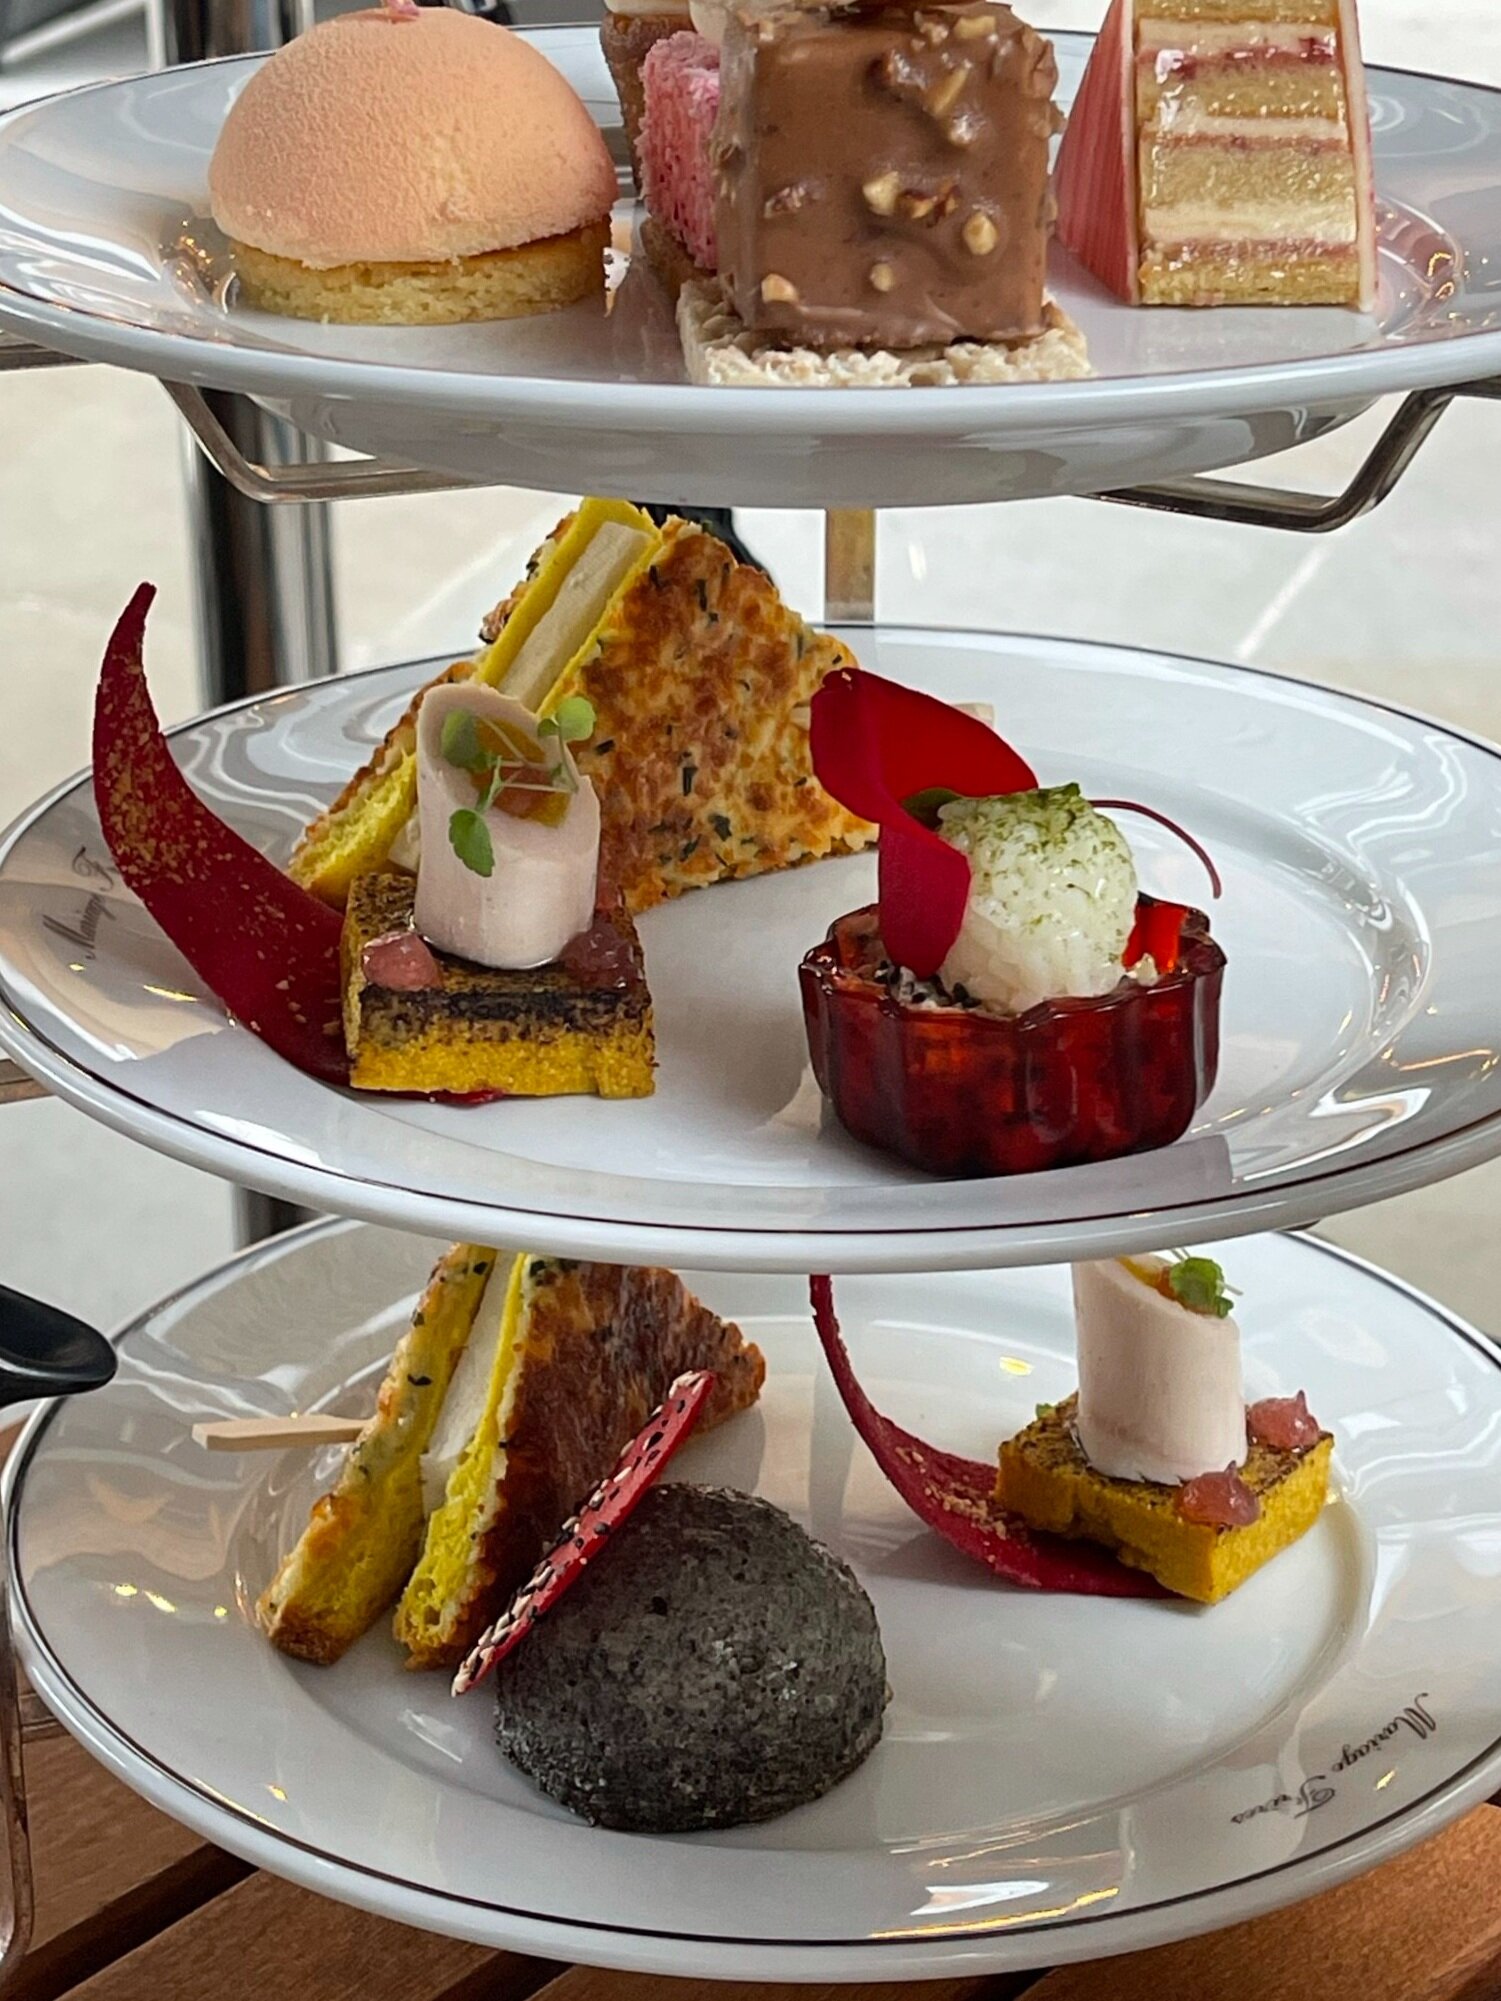 Exquisite seasonal Afternoon Teas at Mariage Frères, Covent Garden